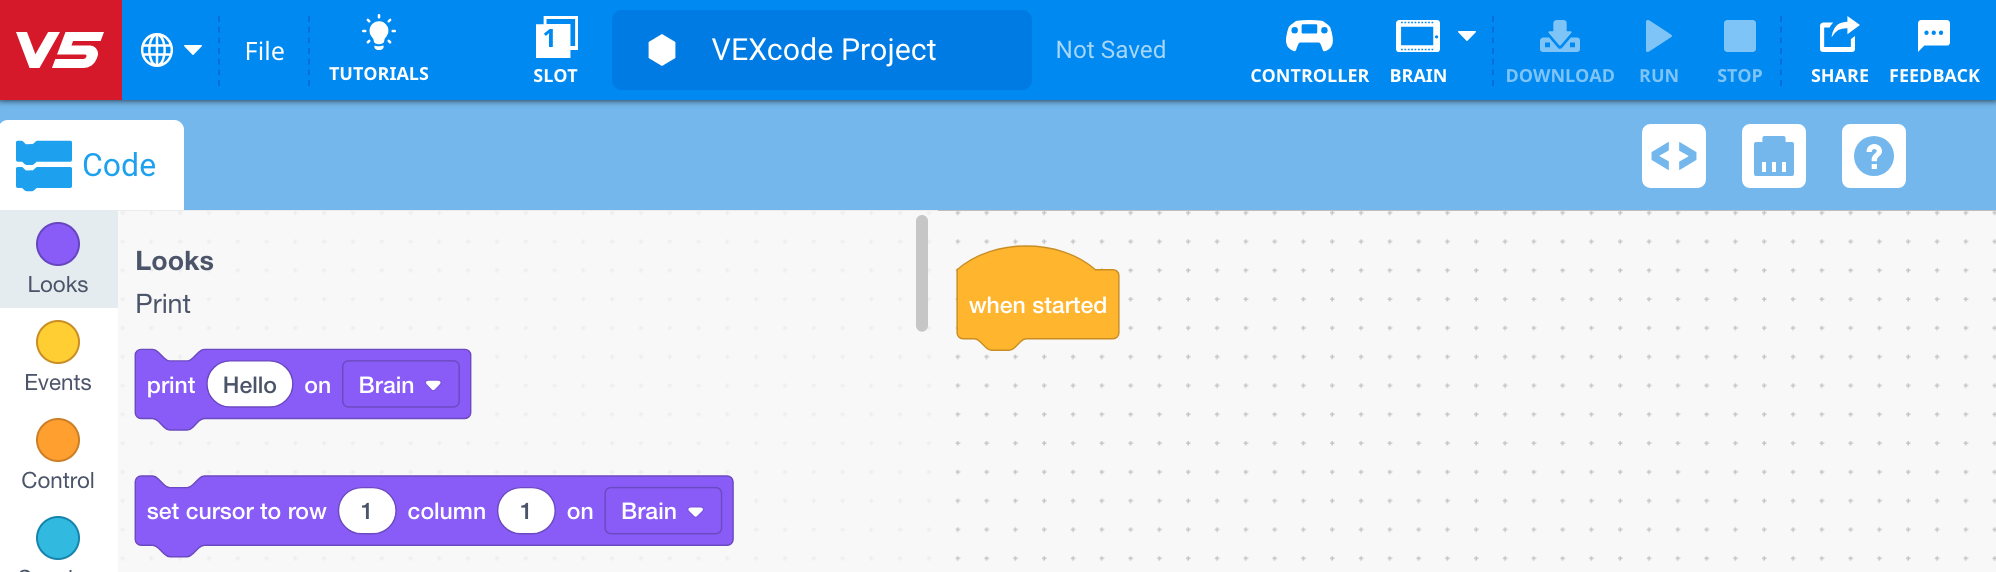 Launch VEXcode V5